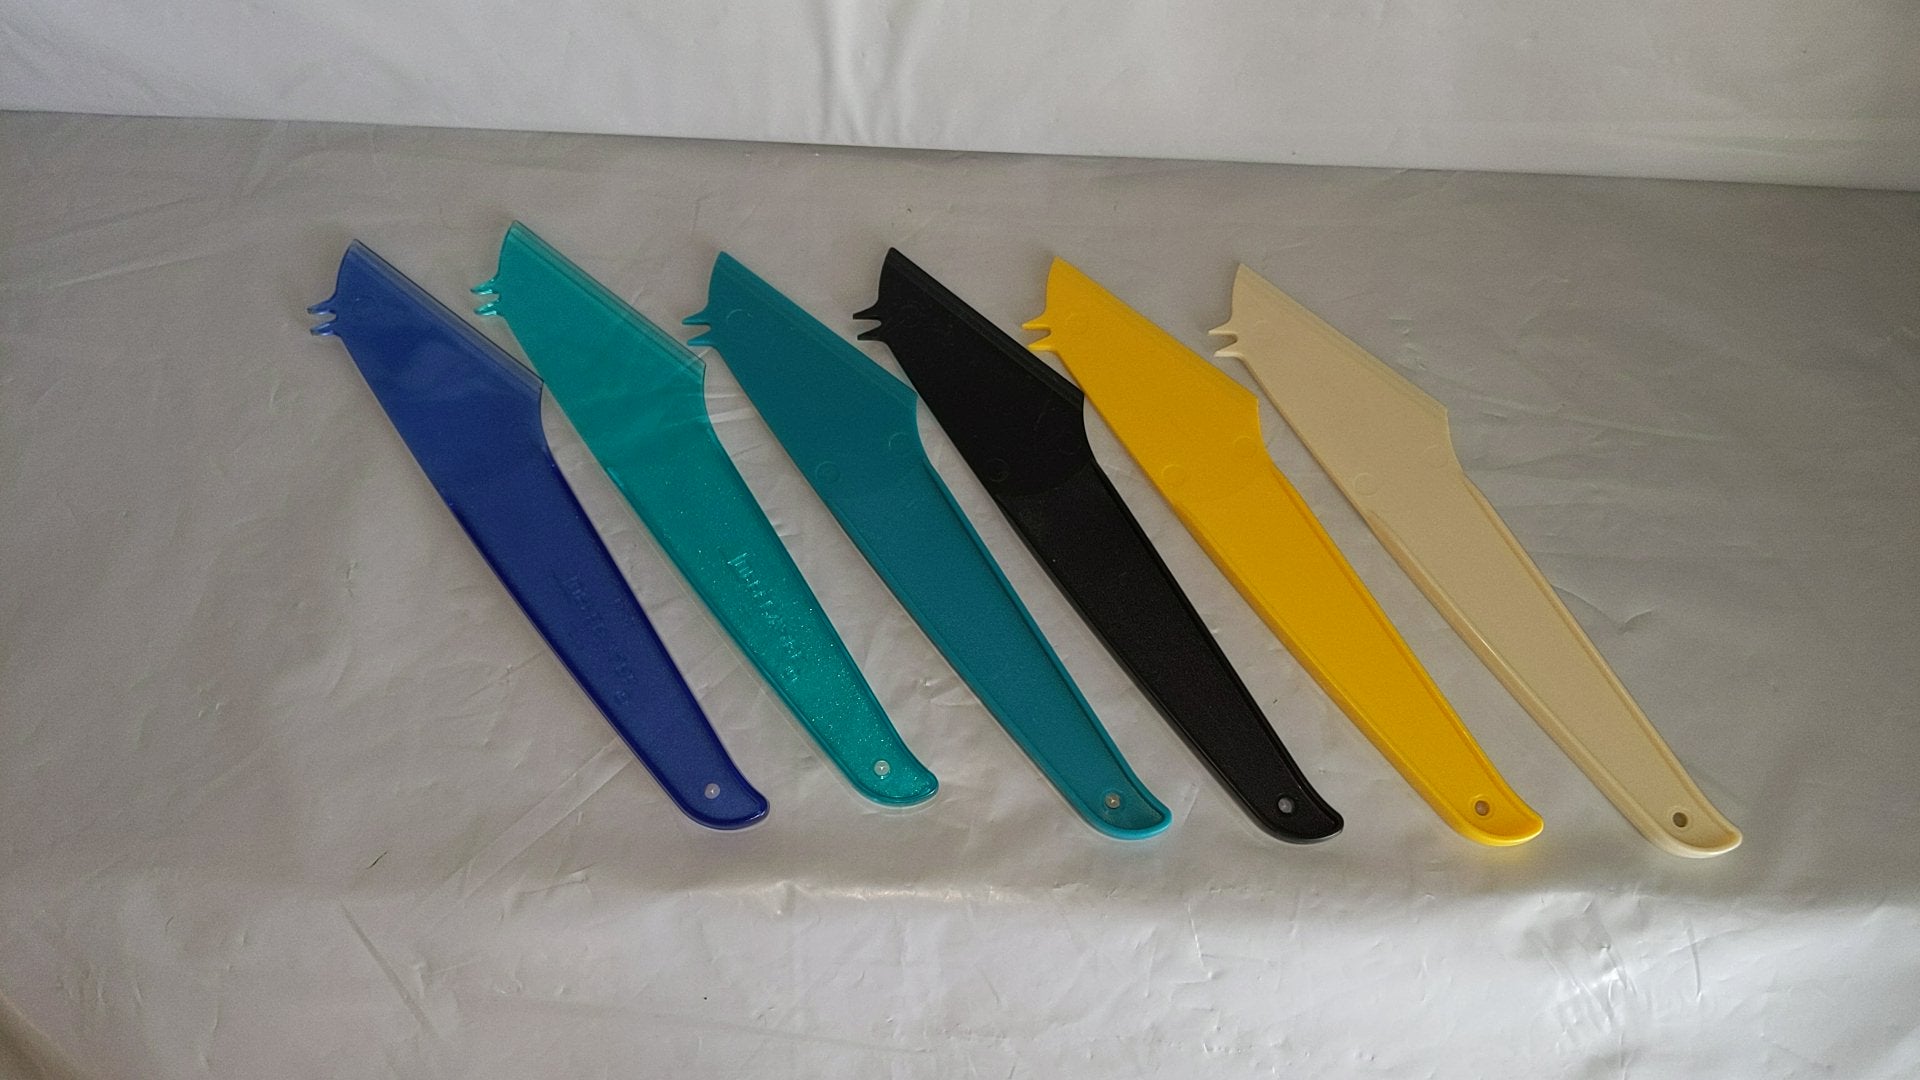 Tupperware 1 COLORED MULTI-PURPOSE NOVELTY GADGET CHEESE SLICER KNIFE SERVER